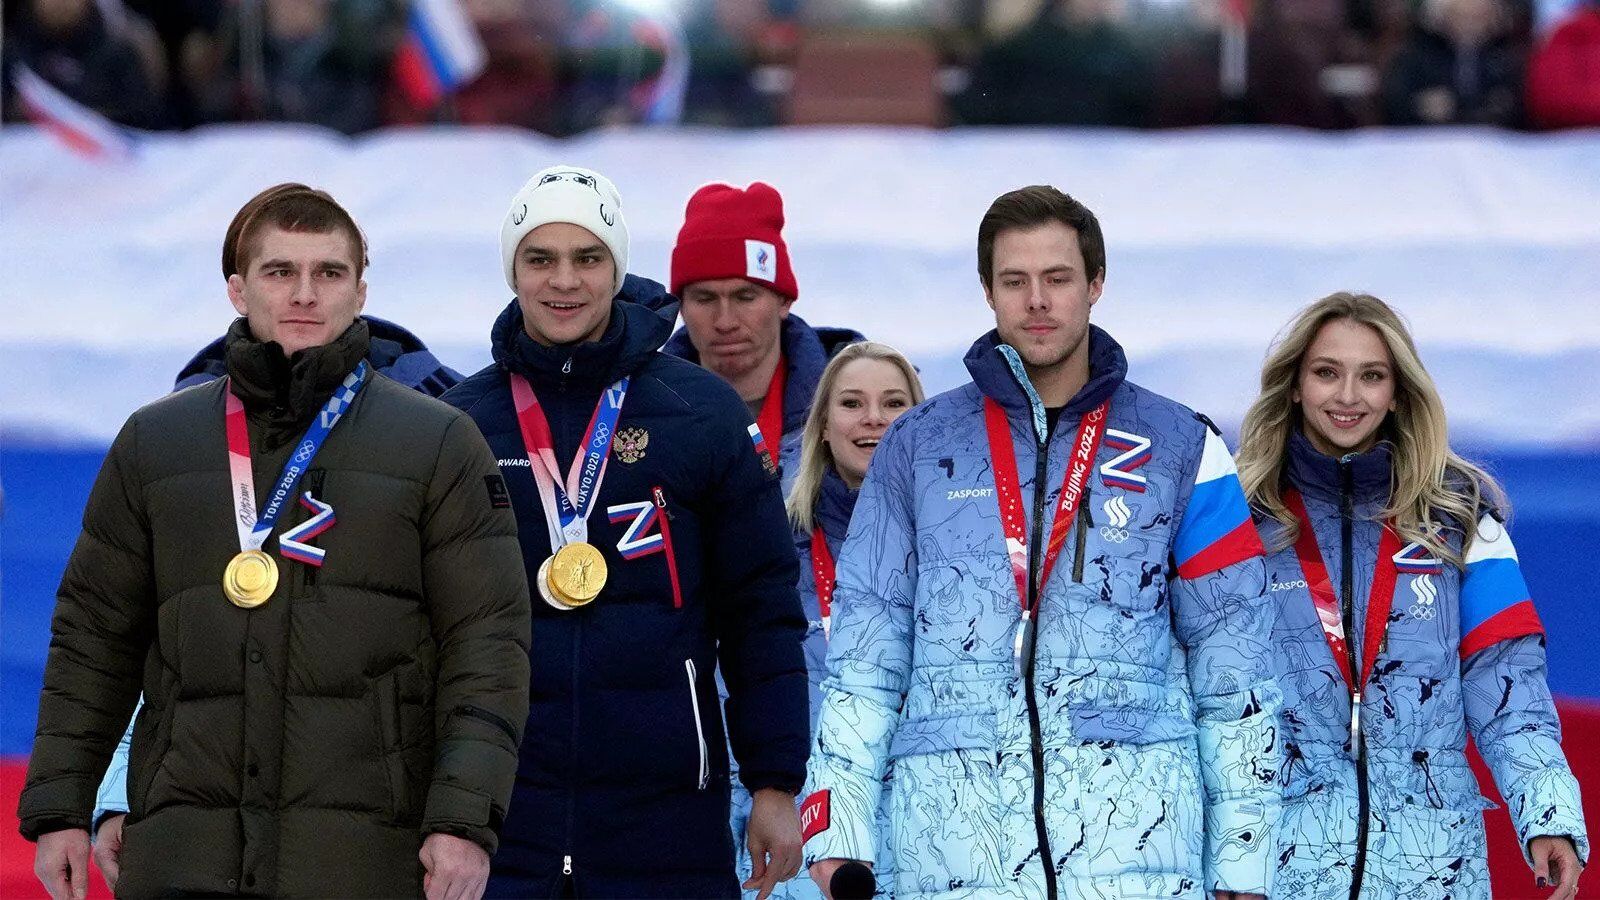 ''Clearly a dump'': the Russian Olympic champion in a patriotic frenzy declared Russia's complete superiority over the United States